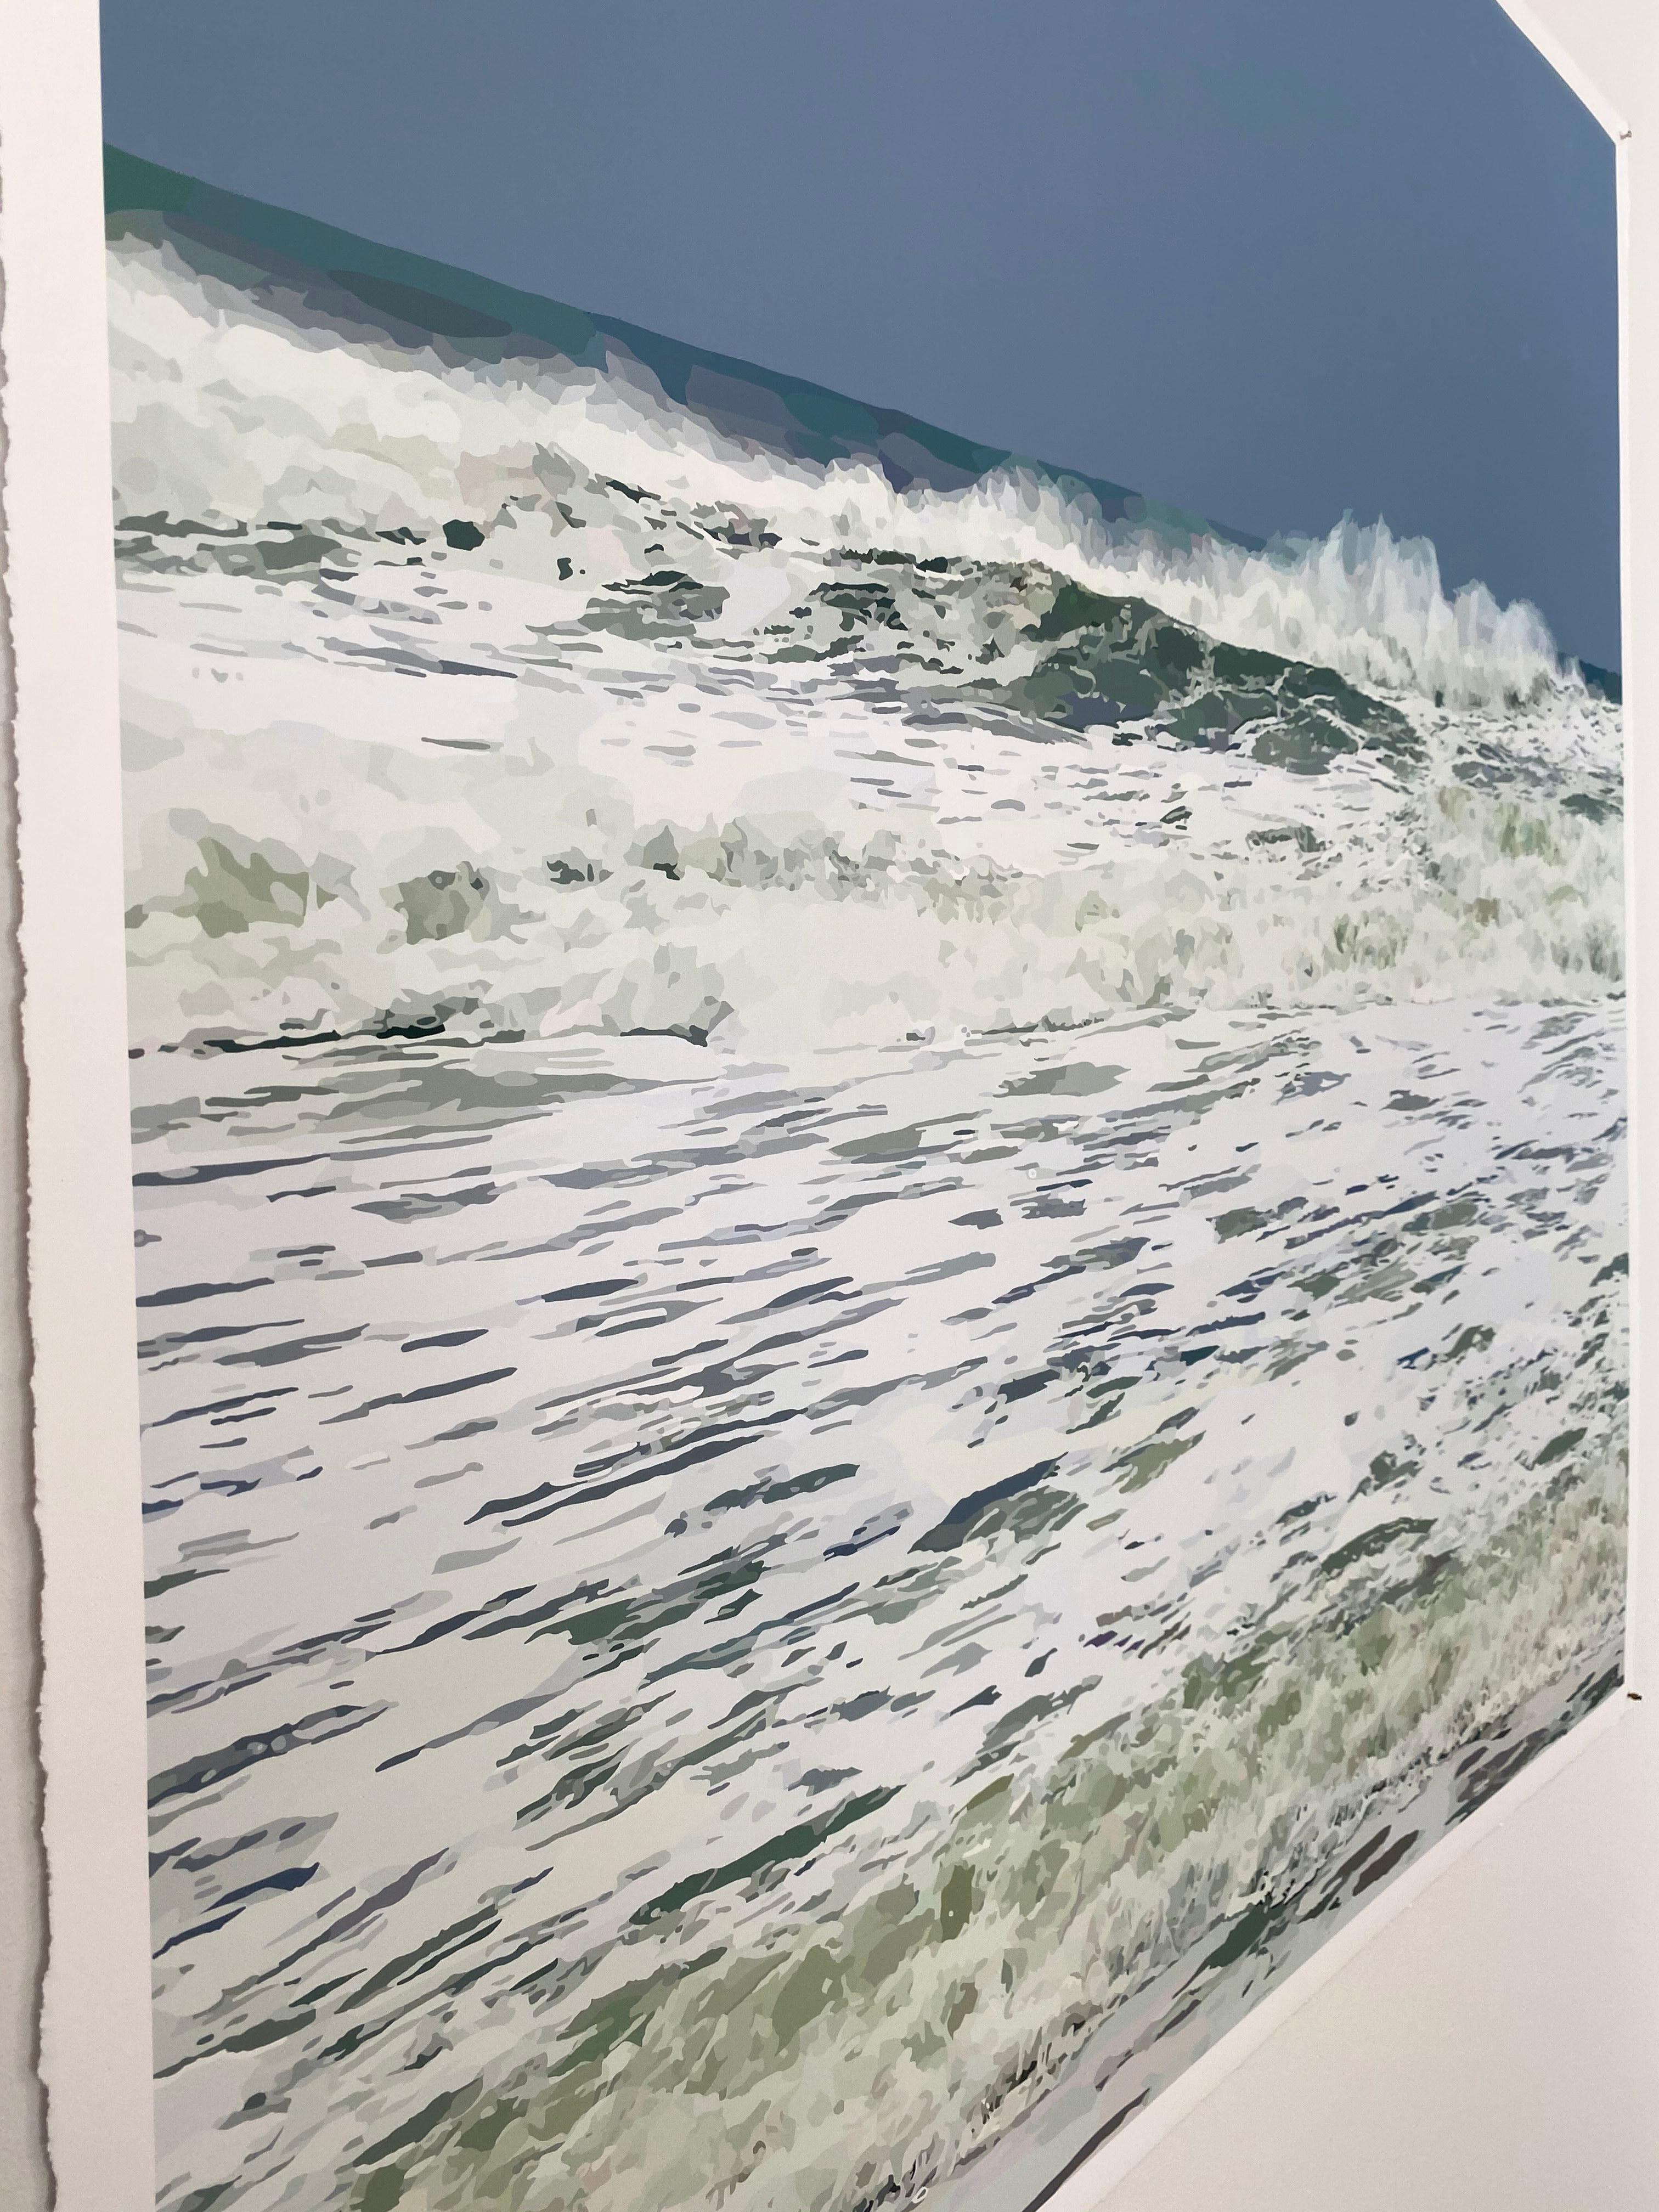 Presented by 'Molly + Friends' for Market Art & Design.
Printed on Hahnemühle Photo Rag Bright with Hand Deckled Edges. Signed, Titled and Numbered by Artist on Front. Artwork comes in white Museum Float frame (framed dimensions are 40 x 40